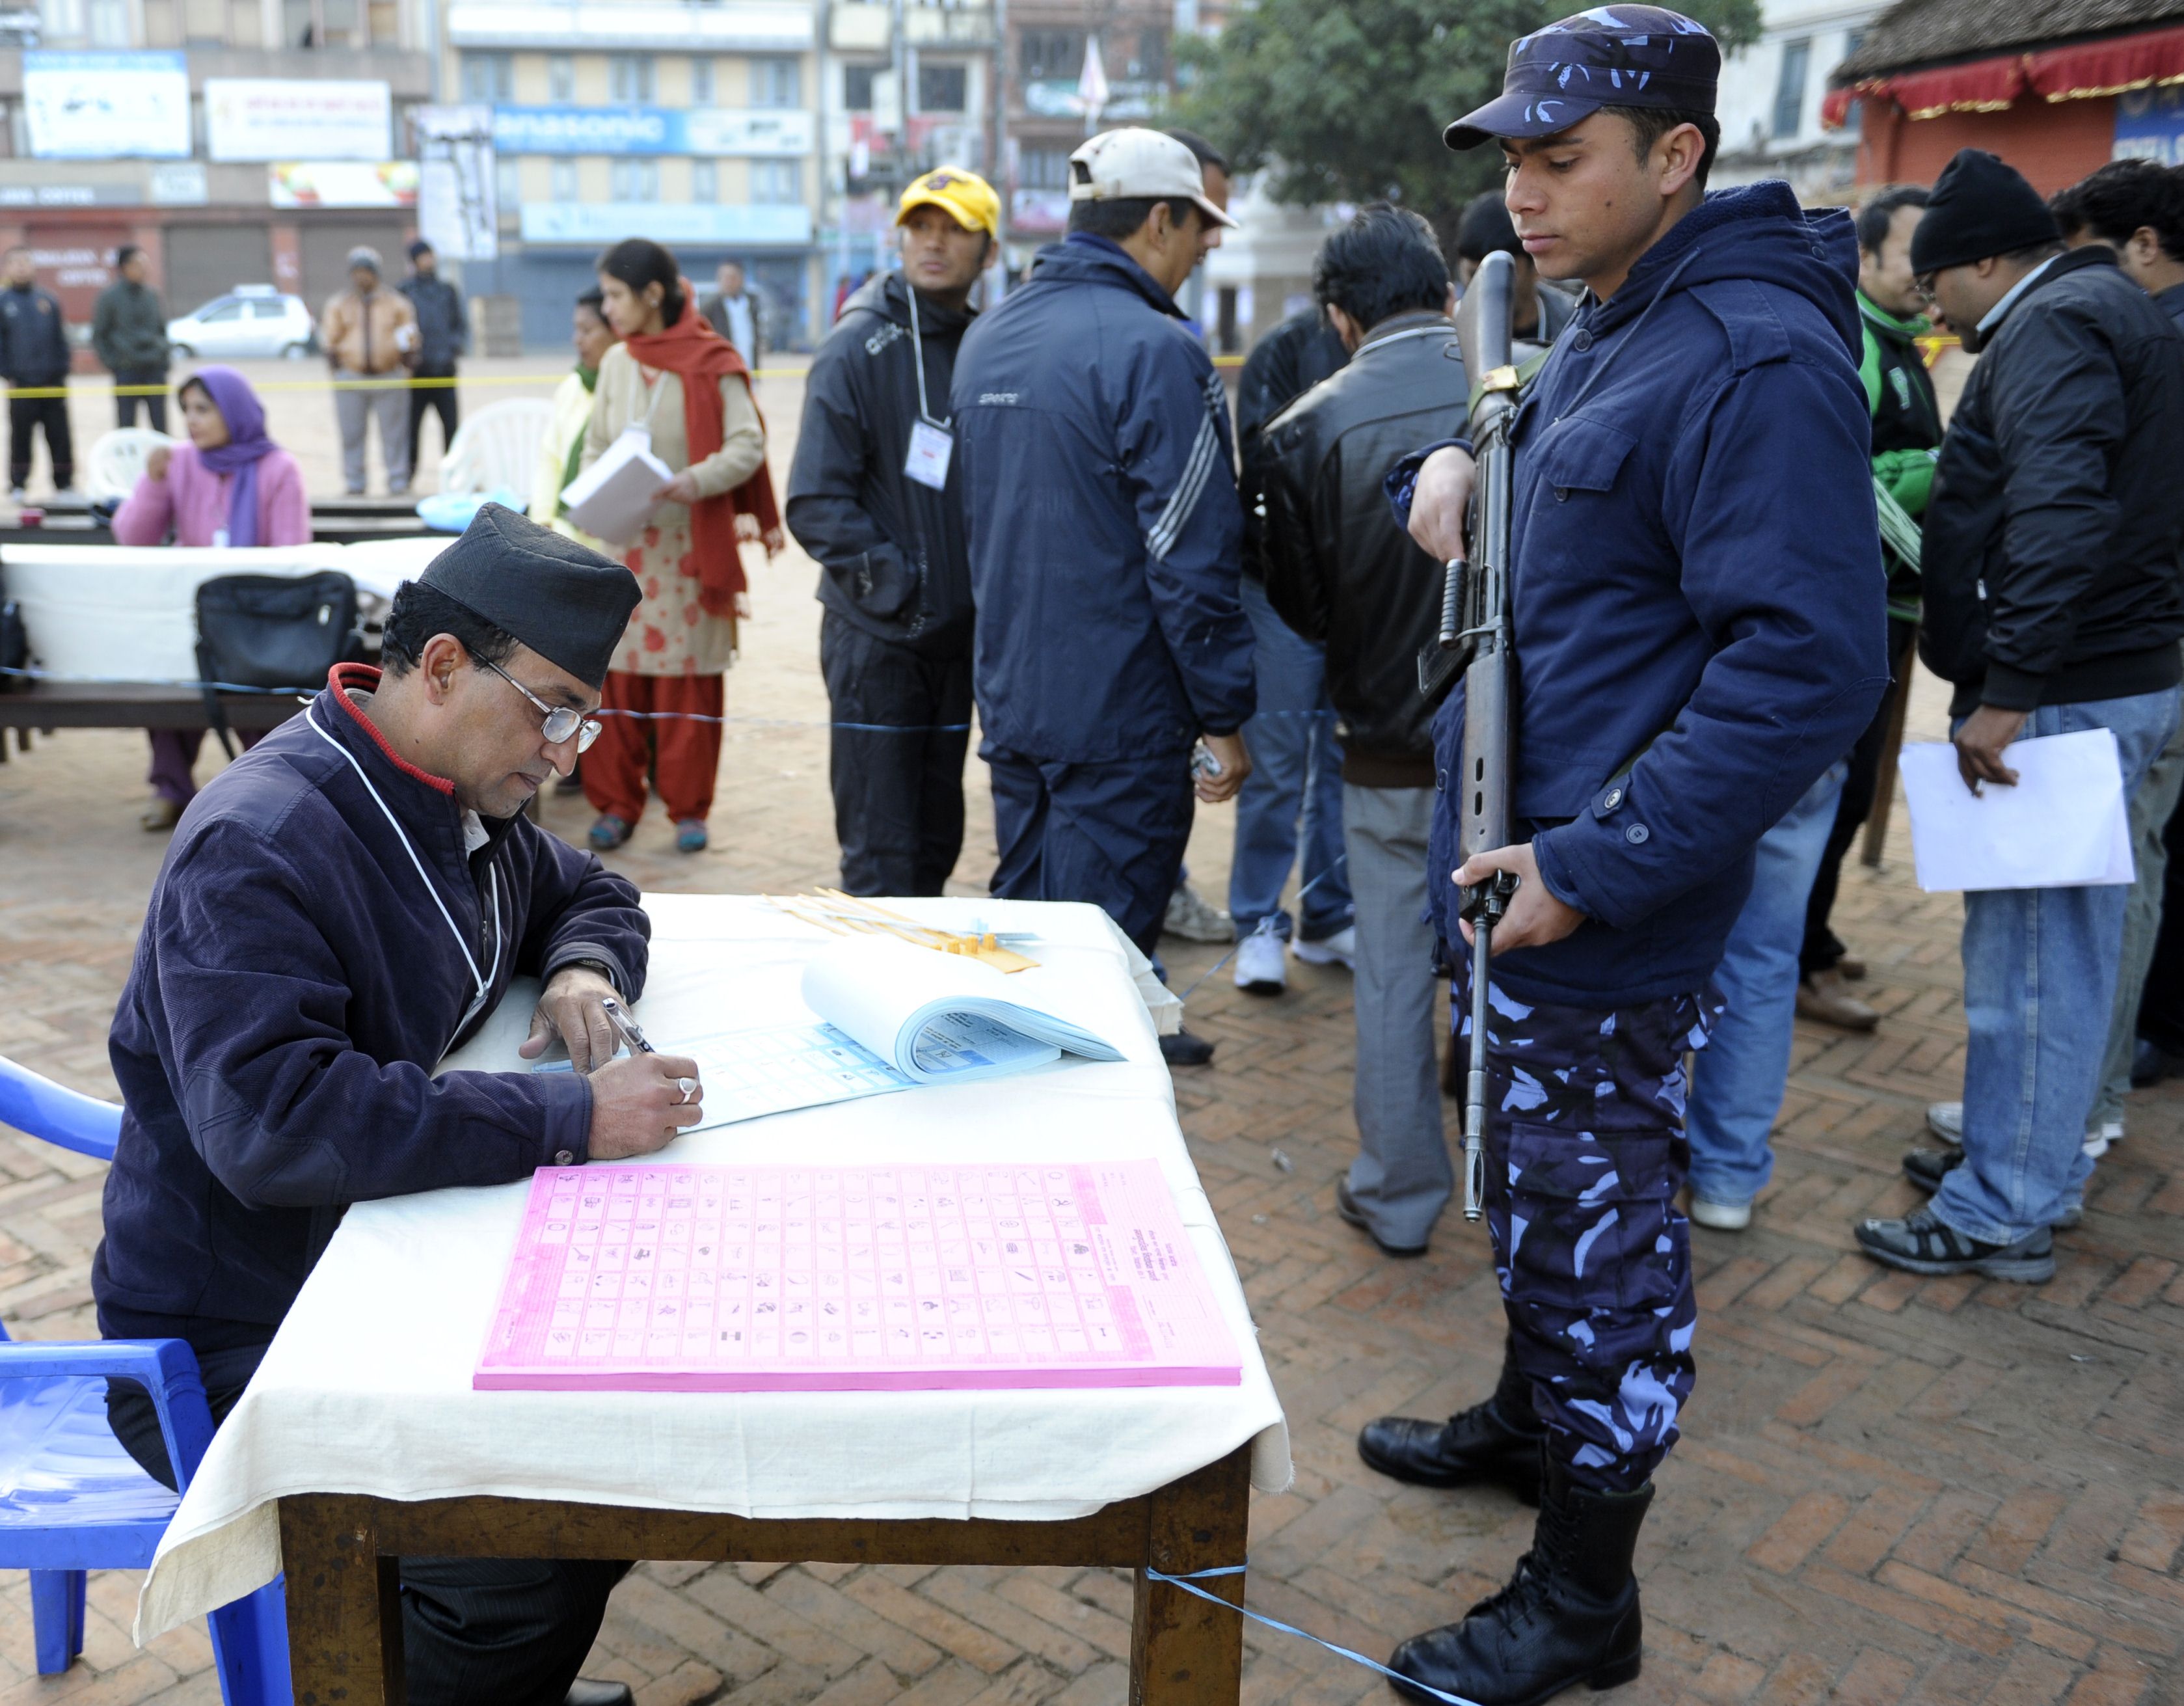 A Nepalese election official prepares ballots as voting begins at a polling station in Kathmandu. Photo: AFP